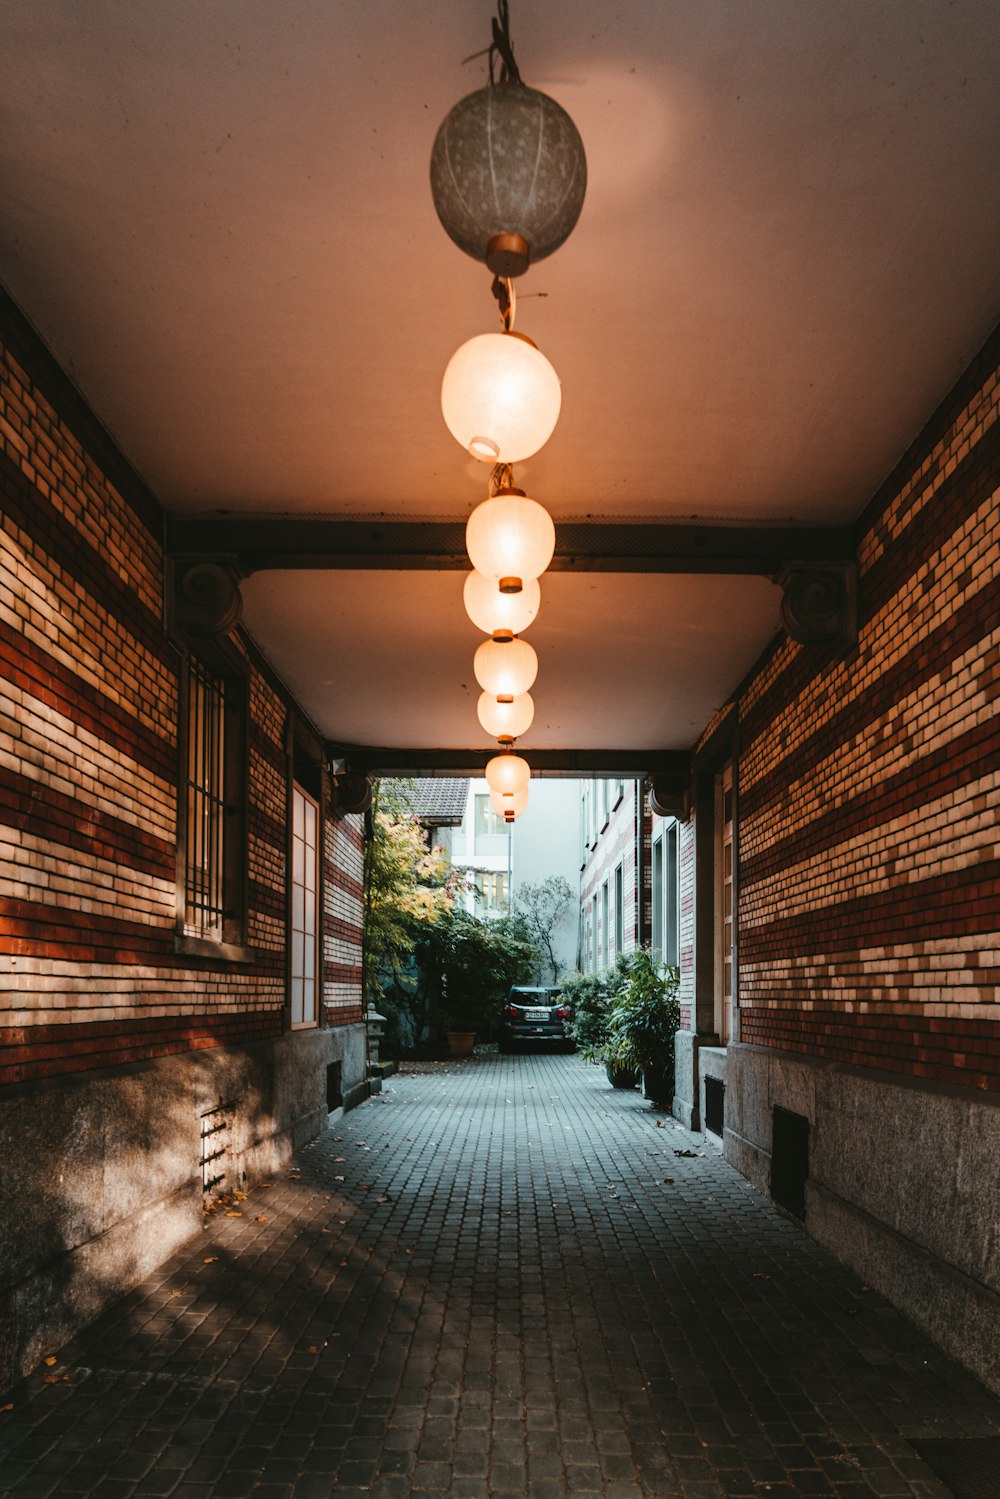 a hallway with a brick wall and several lights hanging from the ceiling